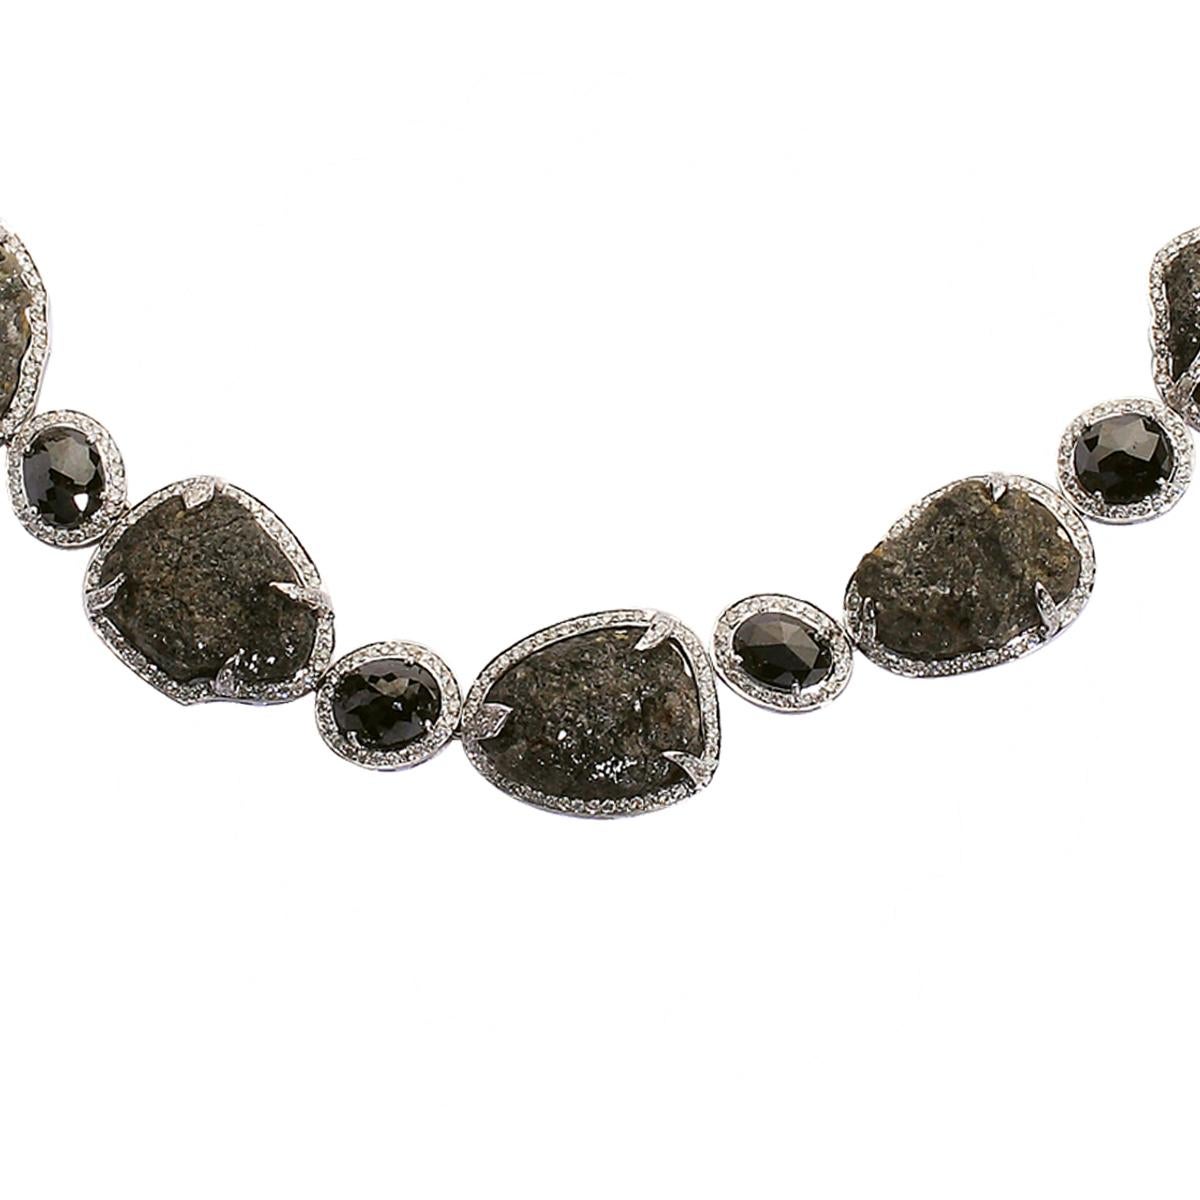 18K White Gold Necklace Featuring Approximately 321cts of Rough Diamonds, Black Diamonds and Round Brilliant Cut Diamonds.